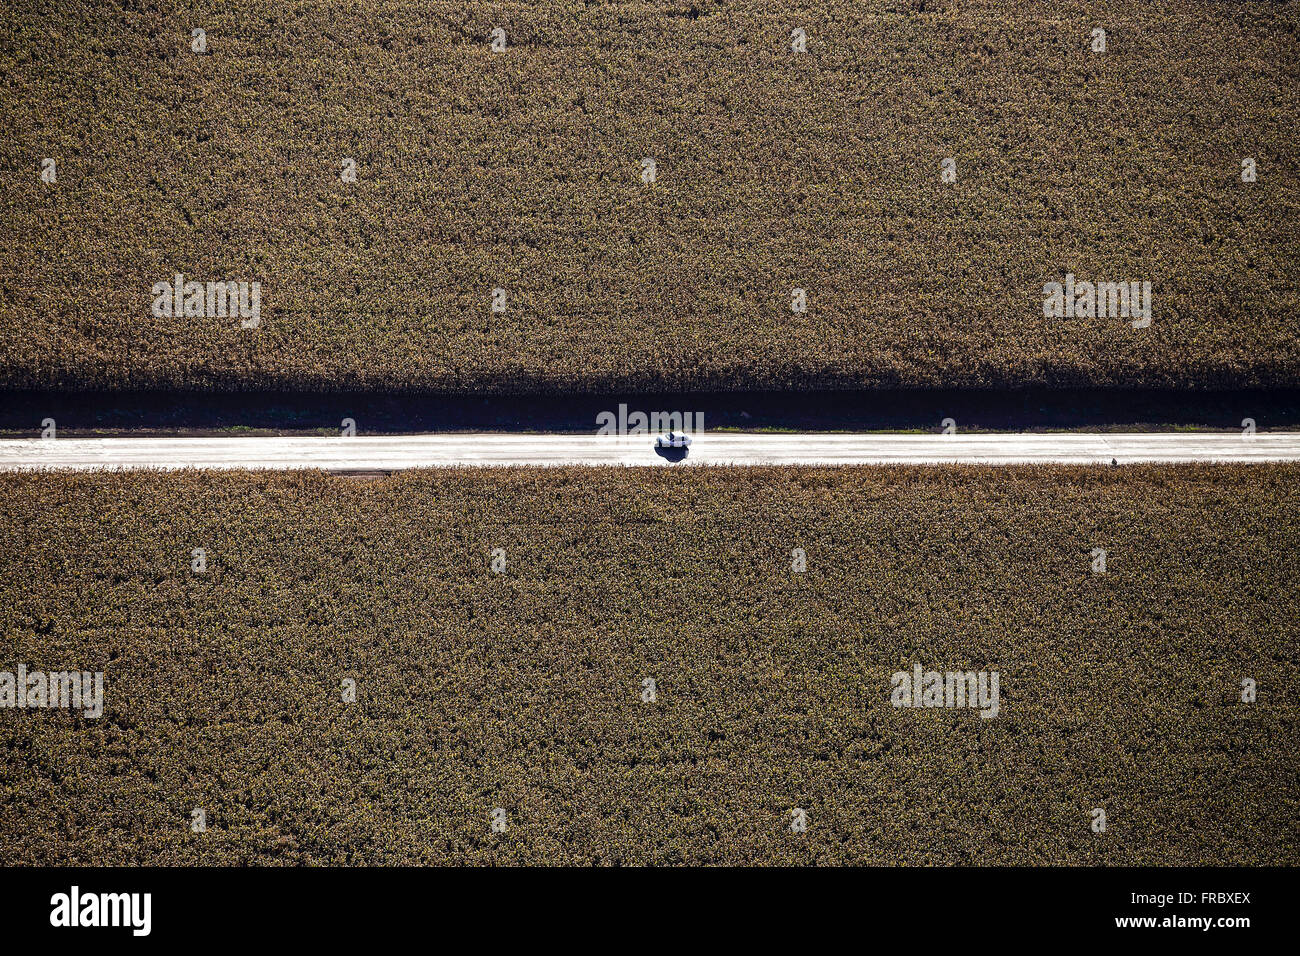 Aerial view of planting corn Stock Photo